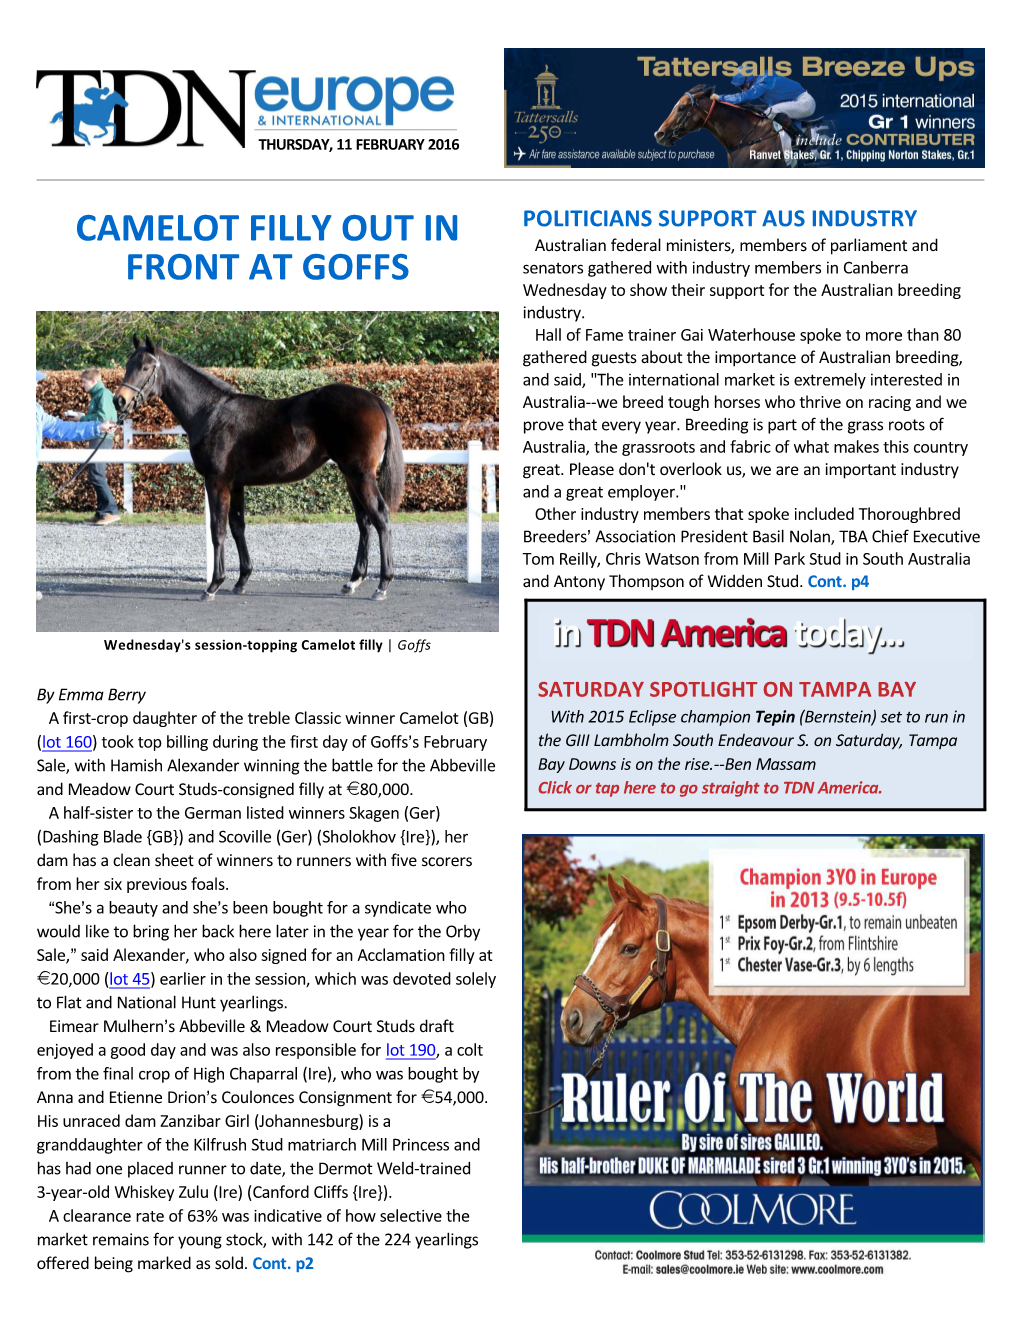 Camelot Filly out in Front at Goffs